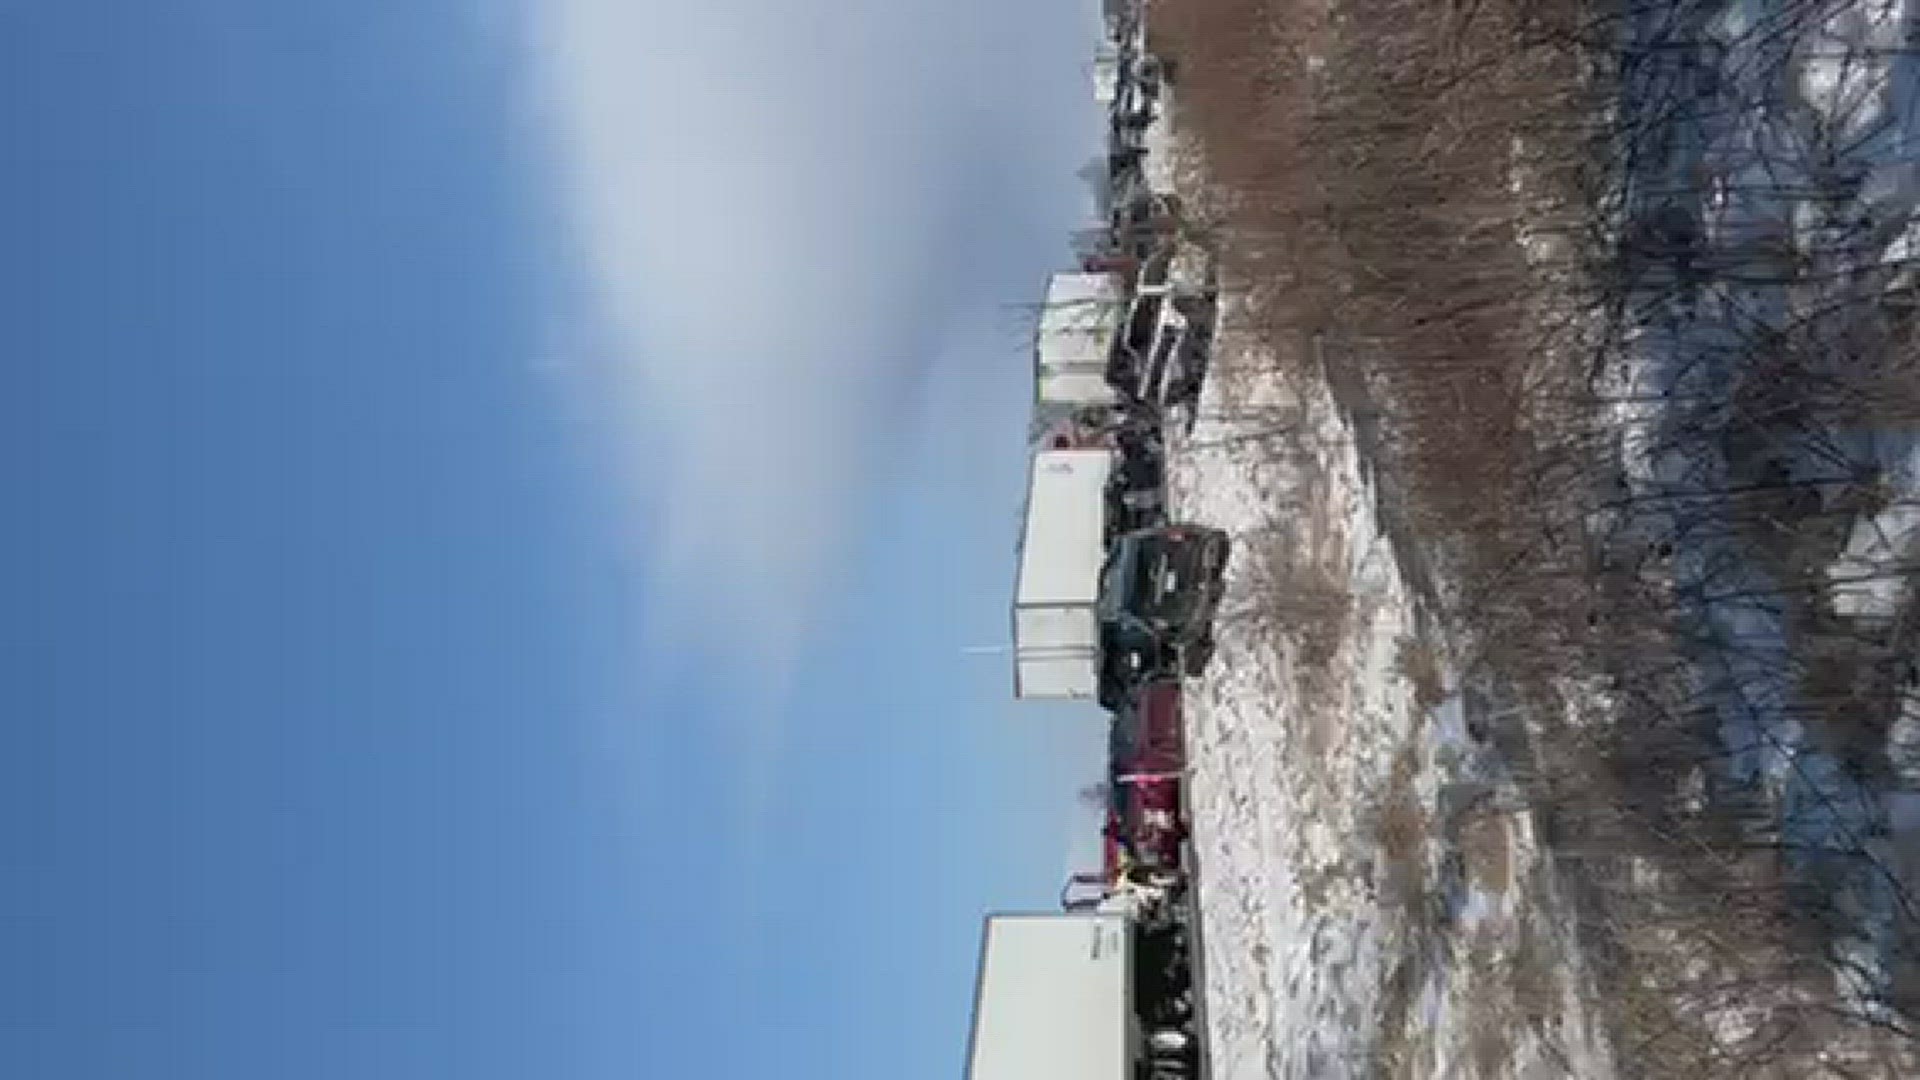 Credit goes to Melissa Elenbaas for taking video of massive pile-up in Ionia County.